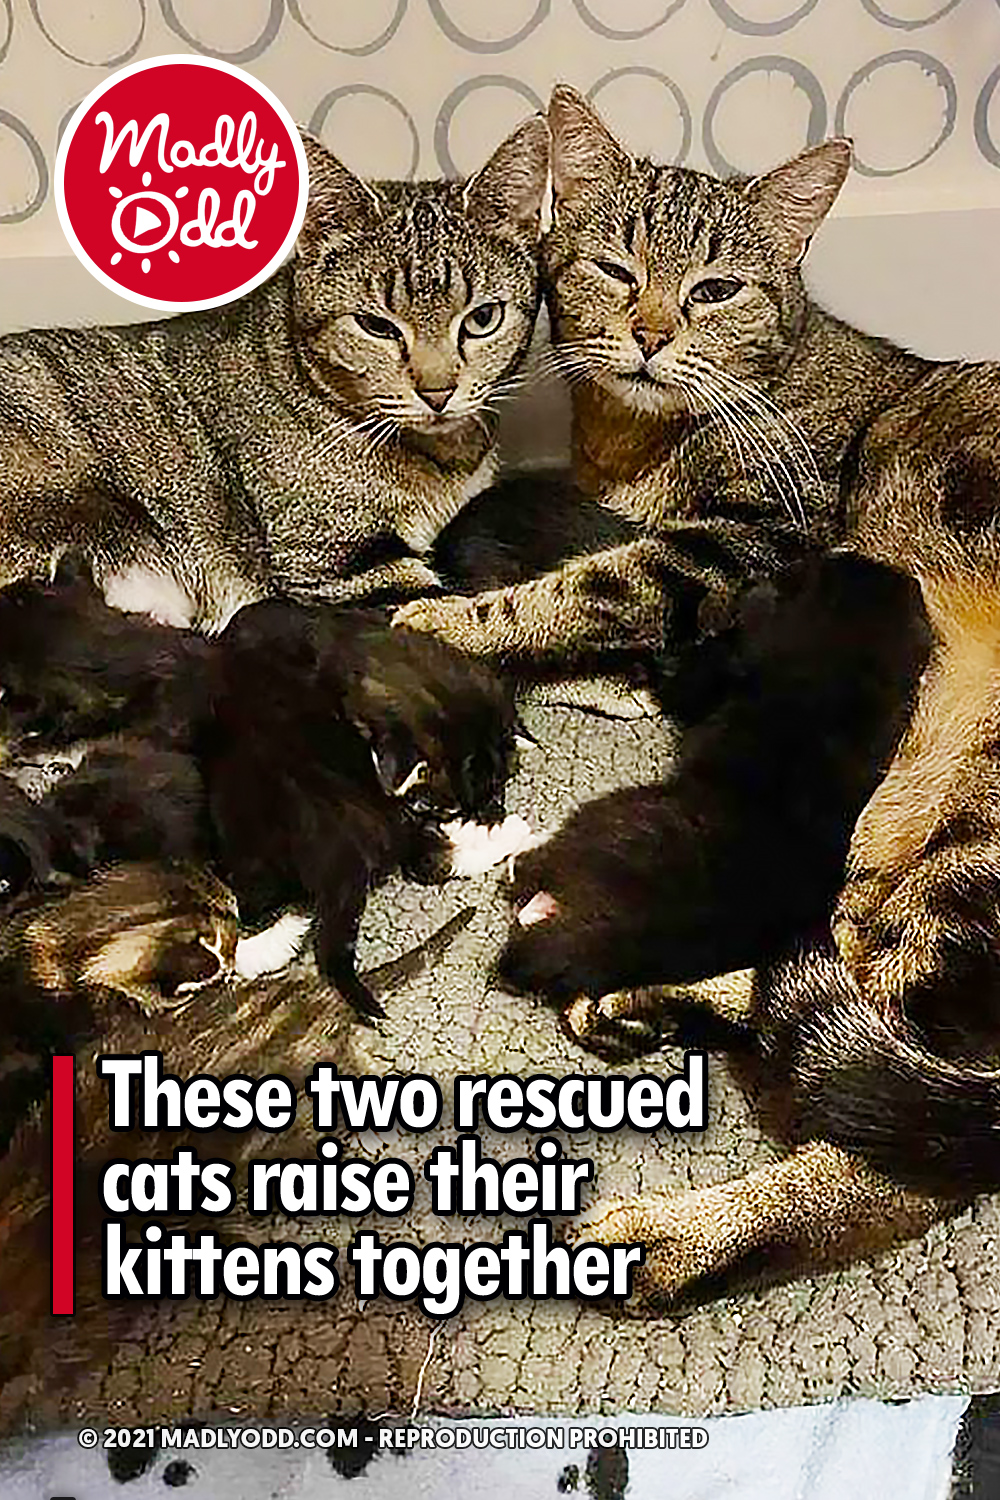 These two rescued cats raise their kittens together